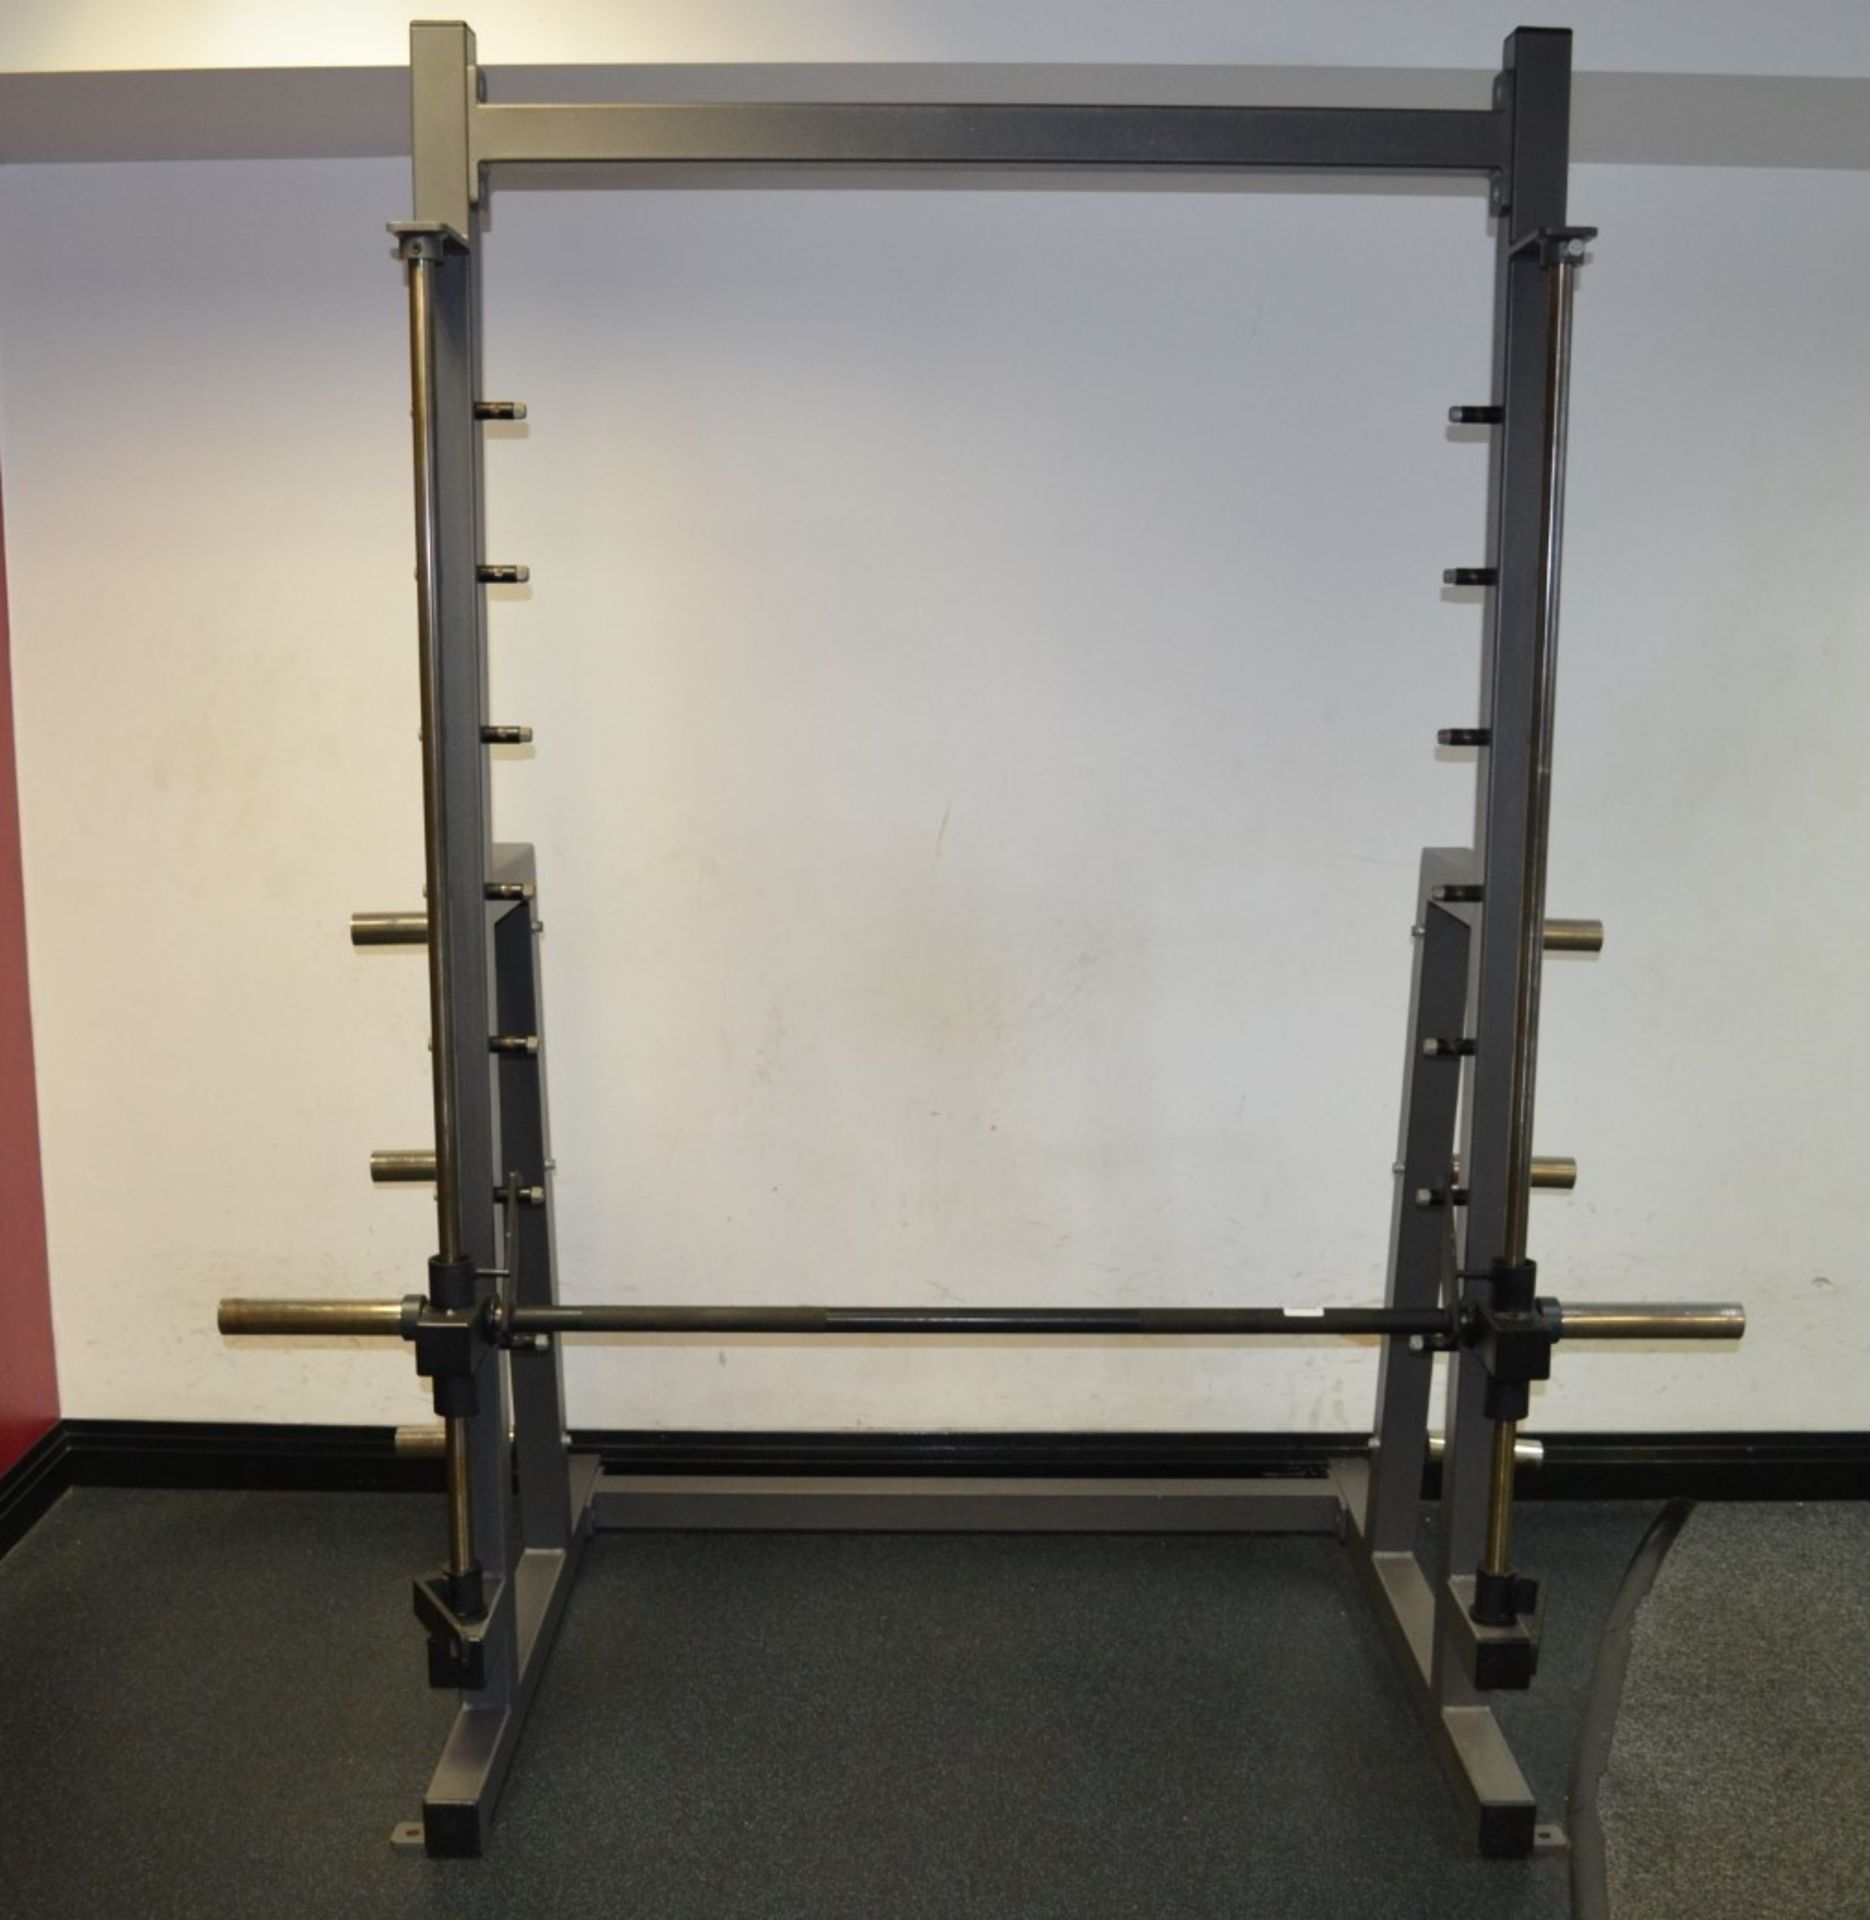 1 x Smith Weights Exercise Machine - Dimensions: H210 x W120 x L190cm - Ref: J2099/GFG - CL356 - - Image 3 of 3